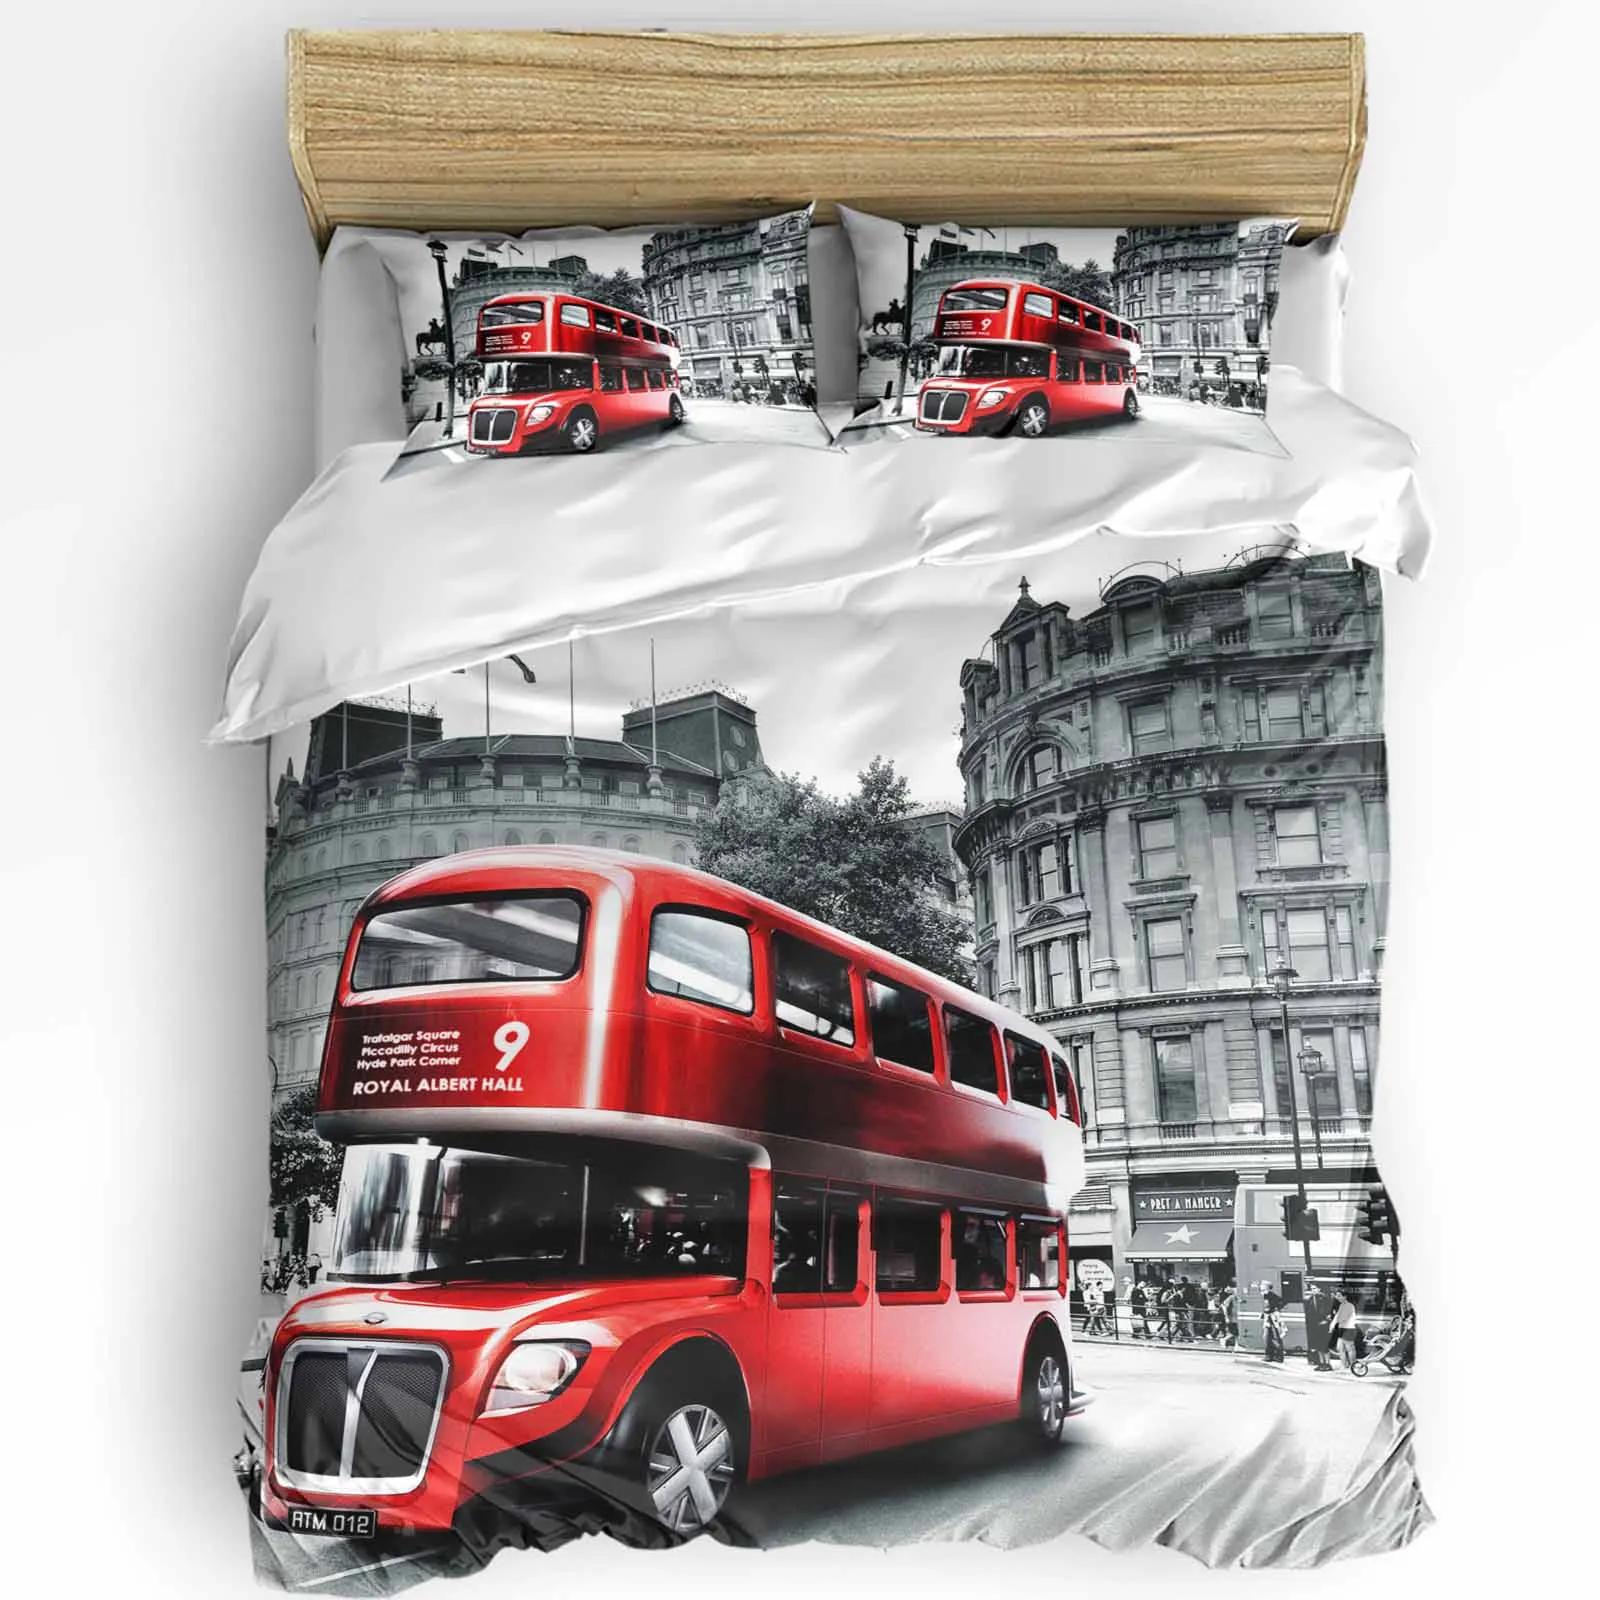 Red Bus London Street Scenery Duvet CoverPillow Case Custom Comforter 3pcs Bedding Set Quilt Cover Double Bed Home T